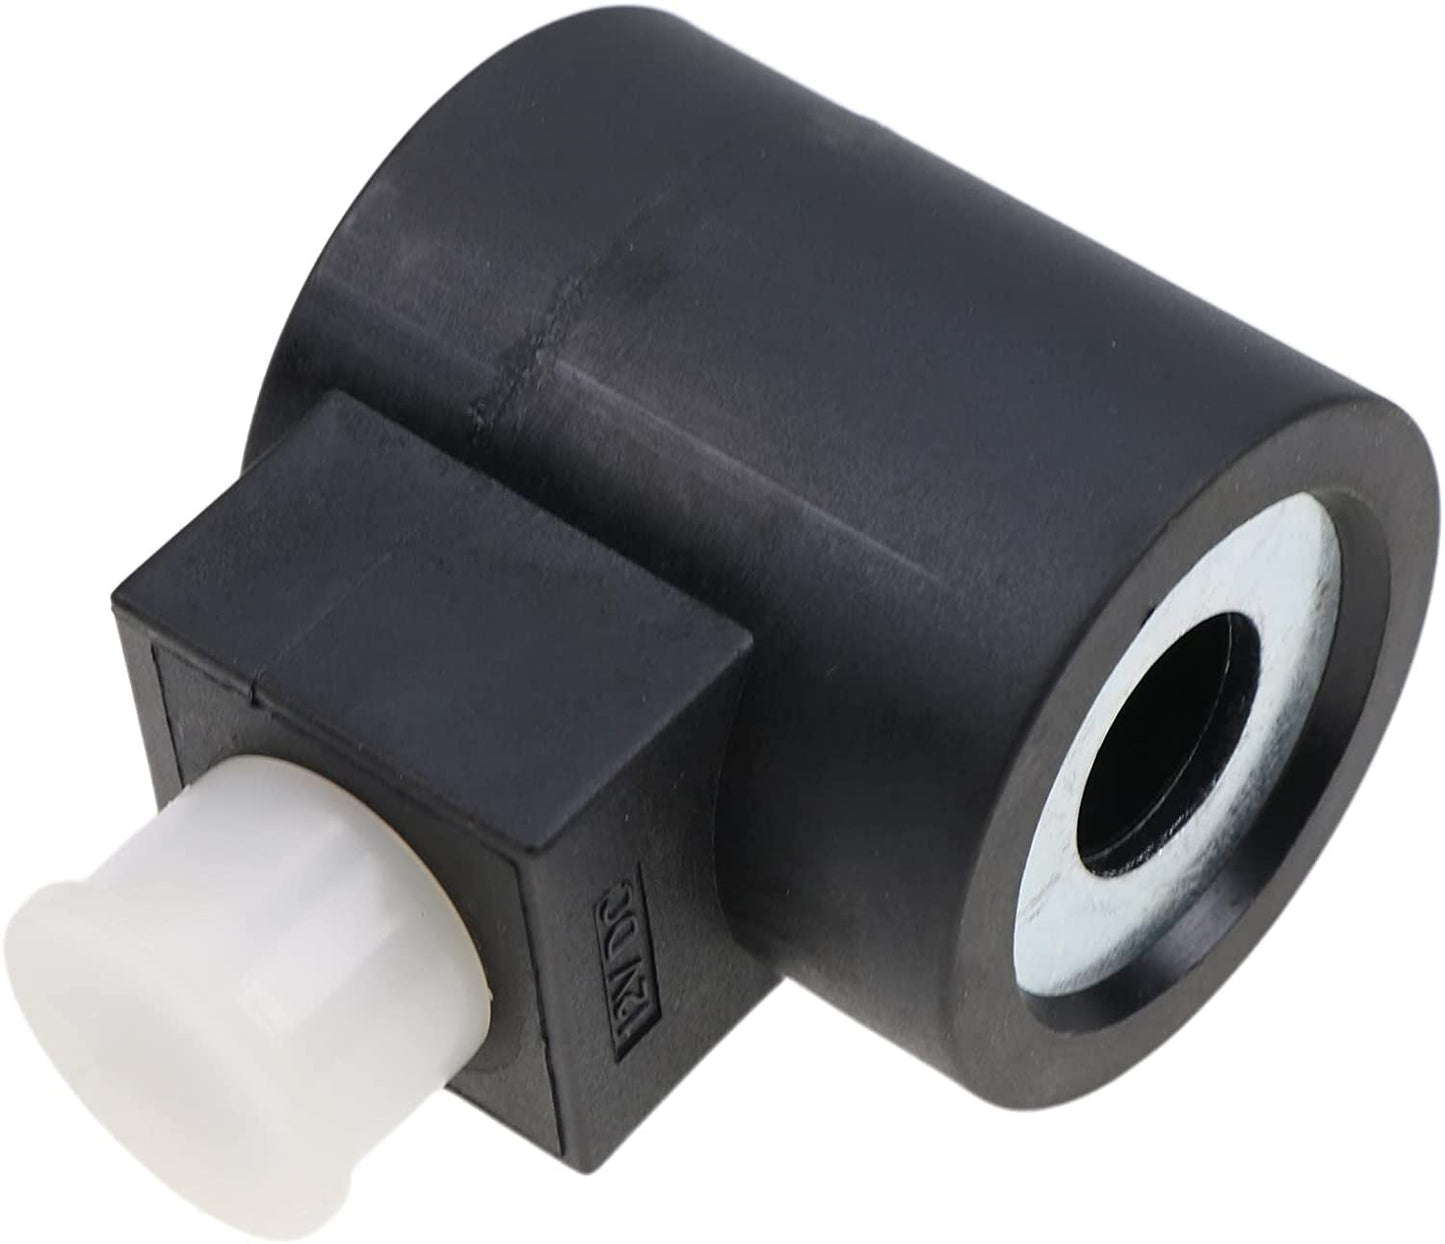 New 5/8" Hole Solenoid Valve Coil 6356012 3-Prong DIN Connector with Cap Compatible with HydraForce Stems 10 12 16 38 58 Series